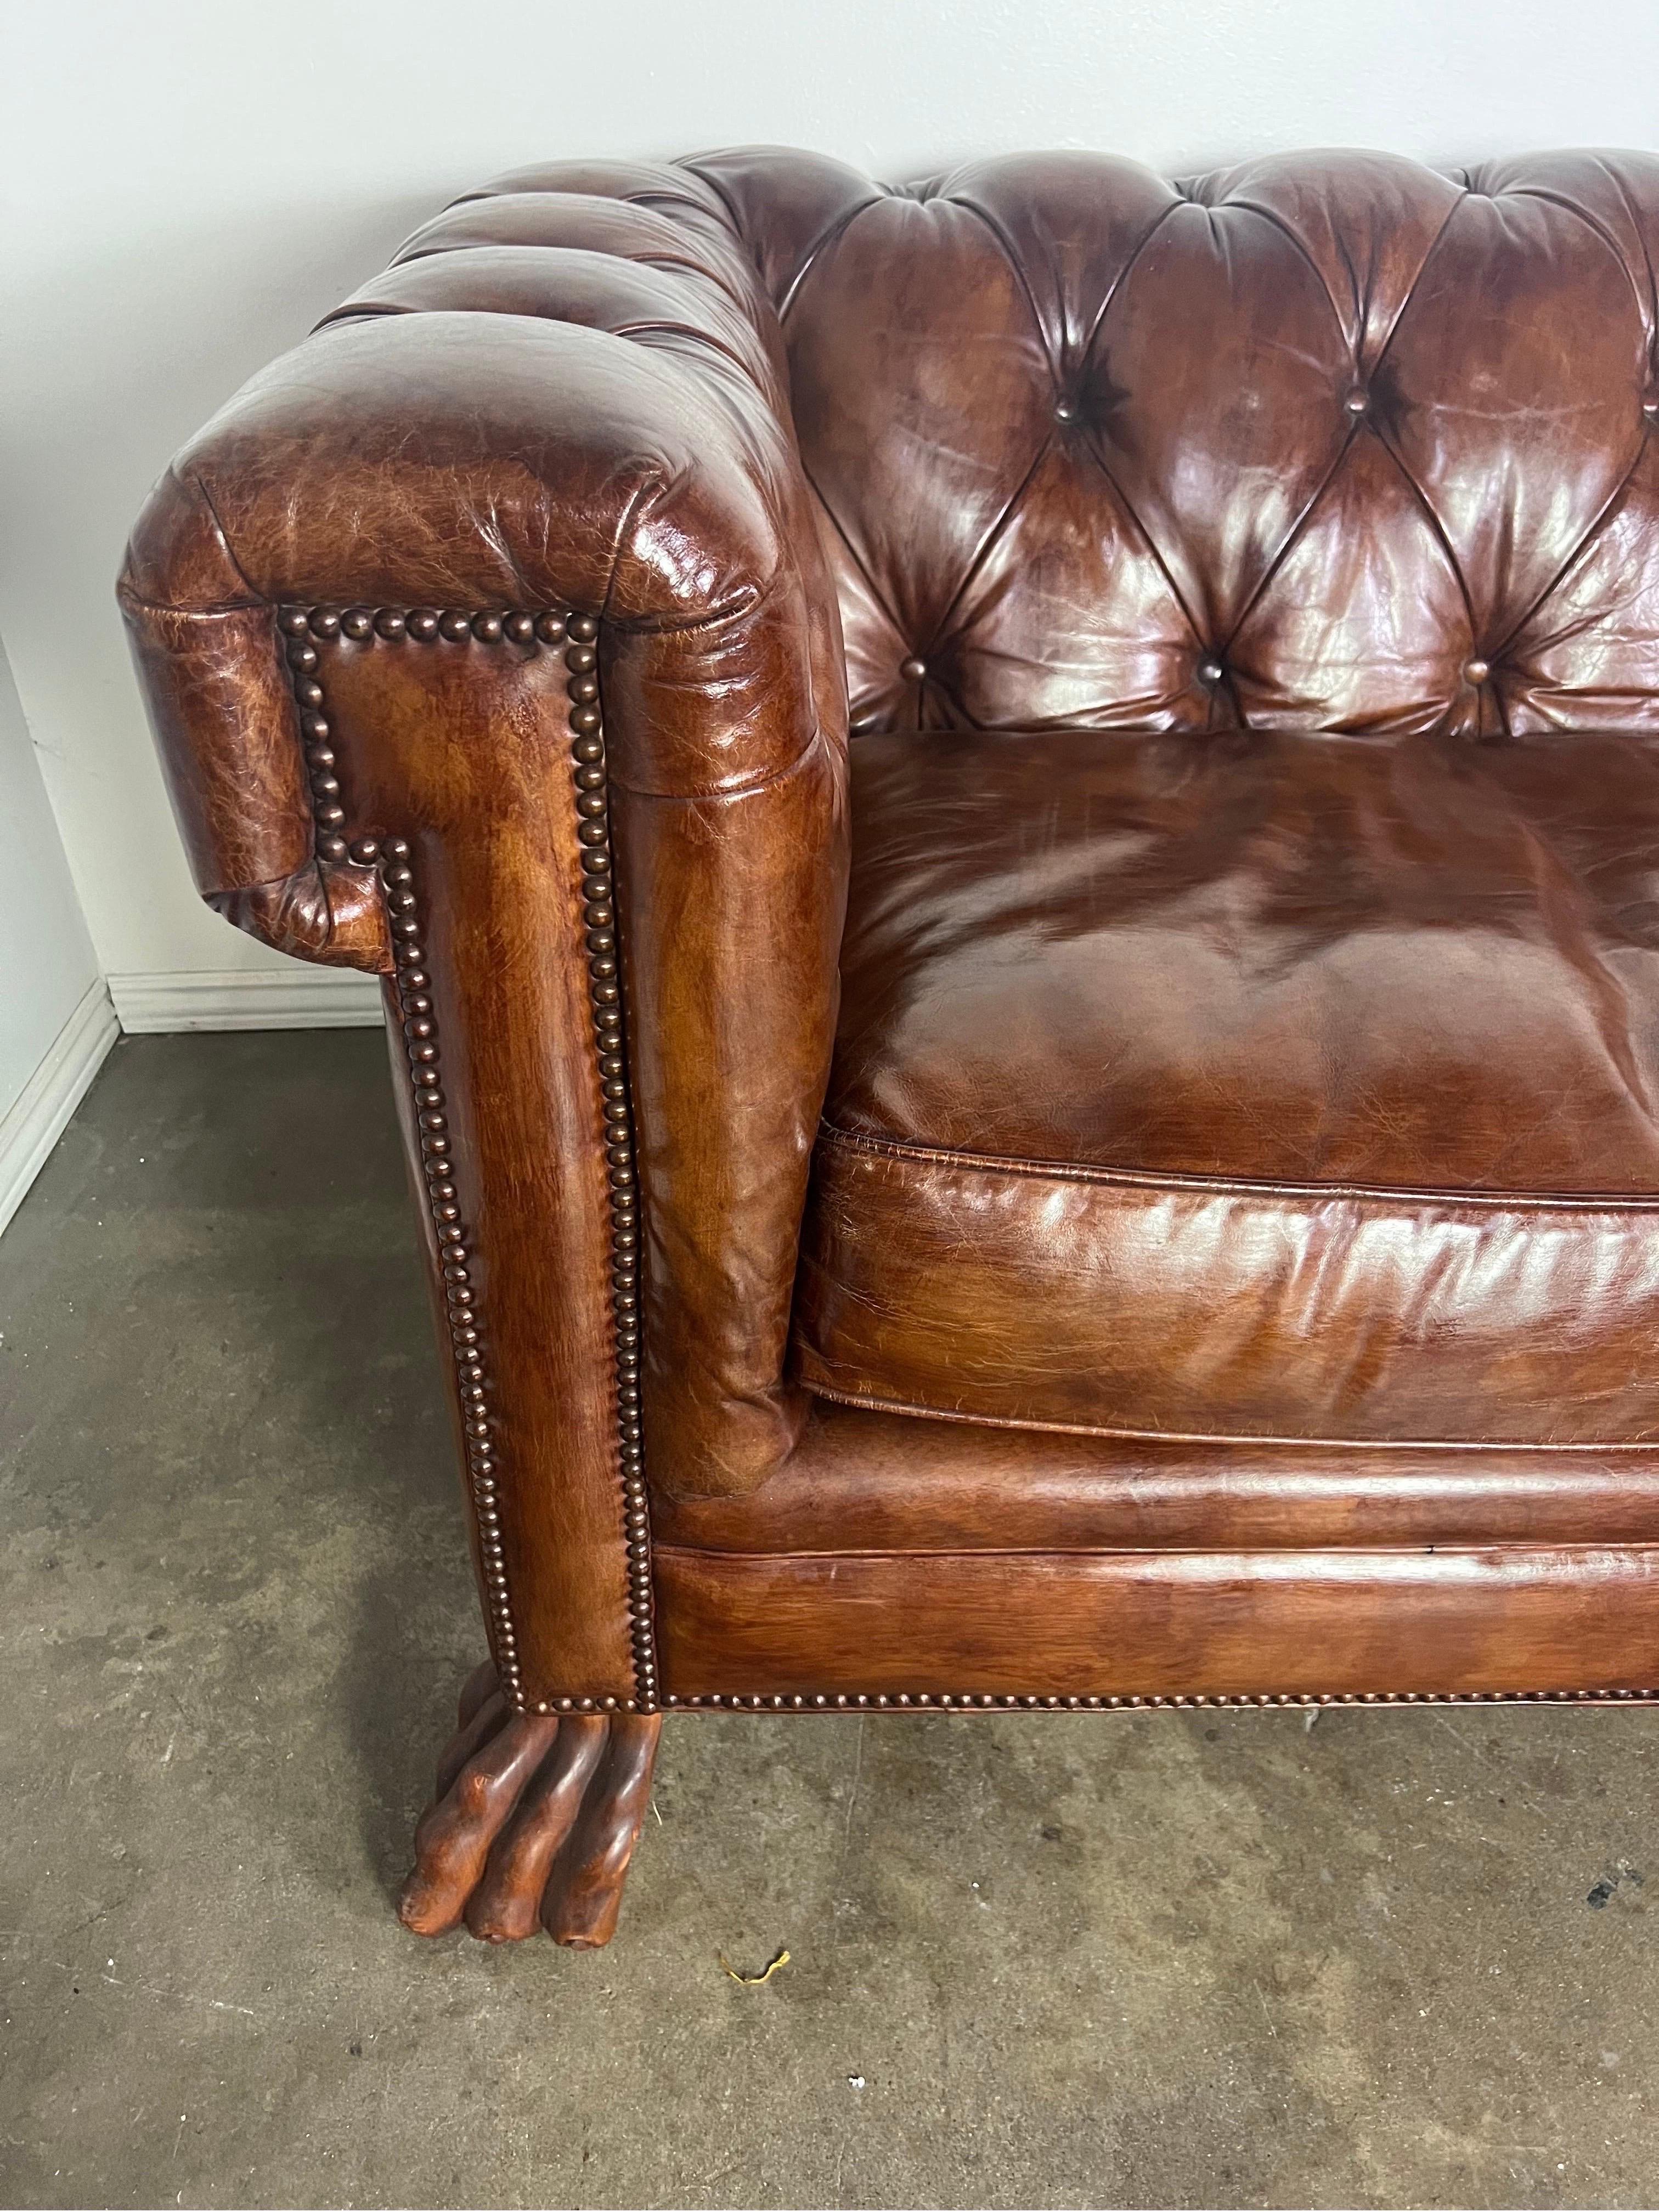 Rich leather tufted Chesterfield style sofa with loose cushions and nailhead trim detail.  The arms have a unique shape and add a modern twist to an old classic style sofa.